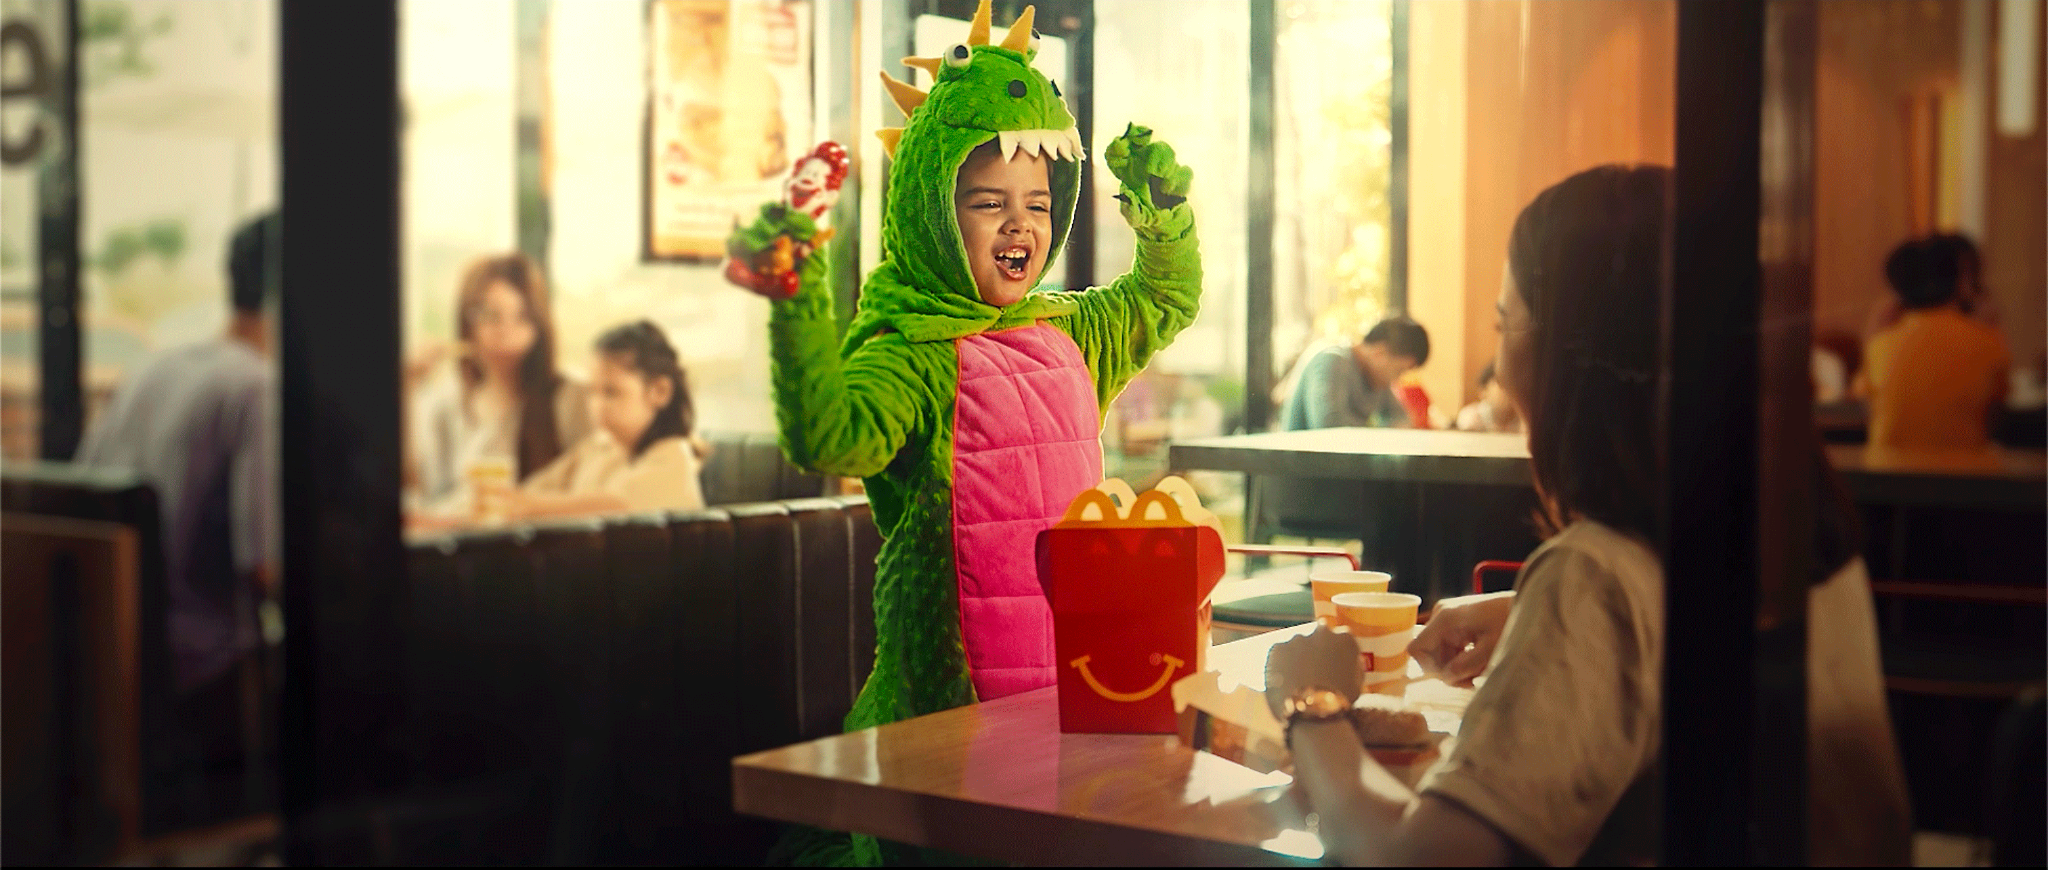 New M Safe film assures safe, feel-good family moments at McDonald’s